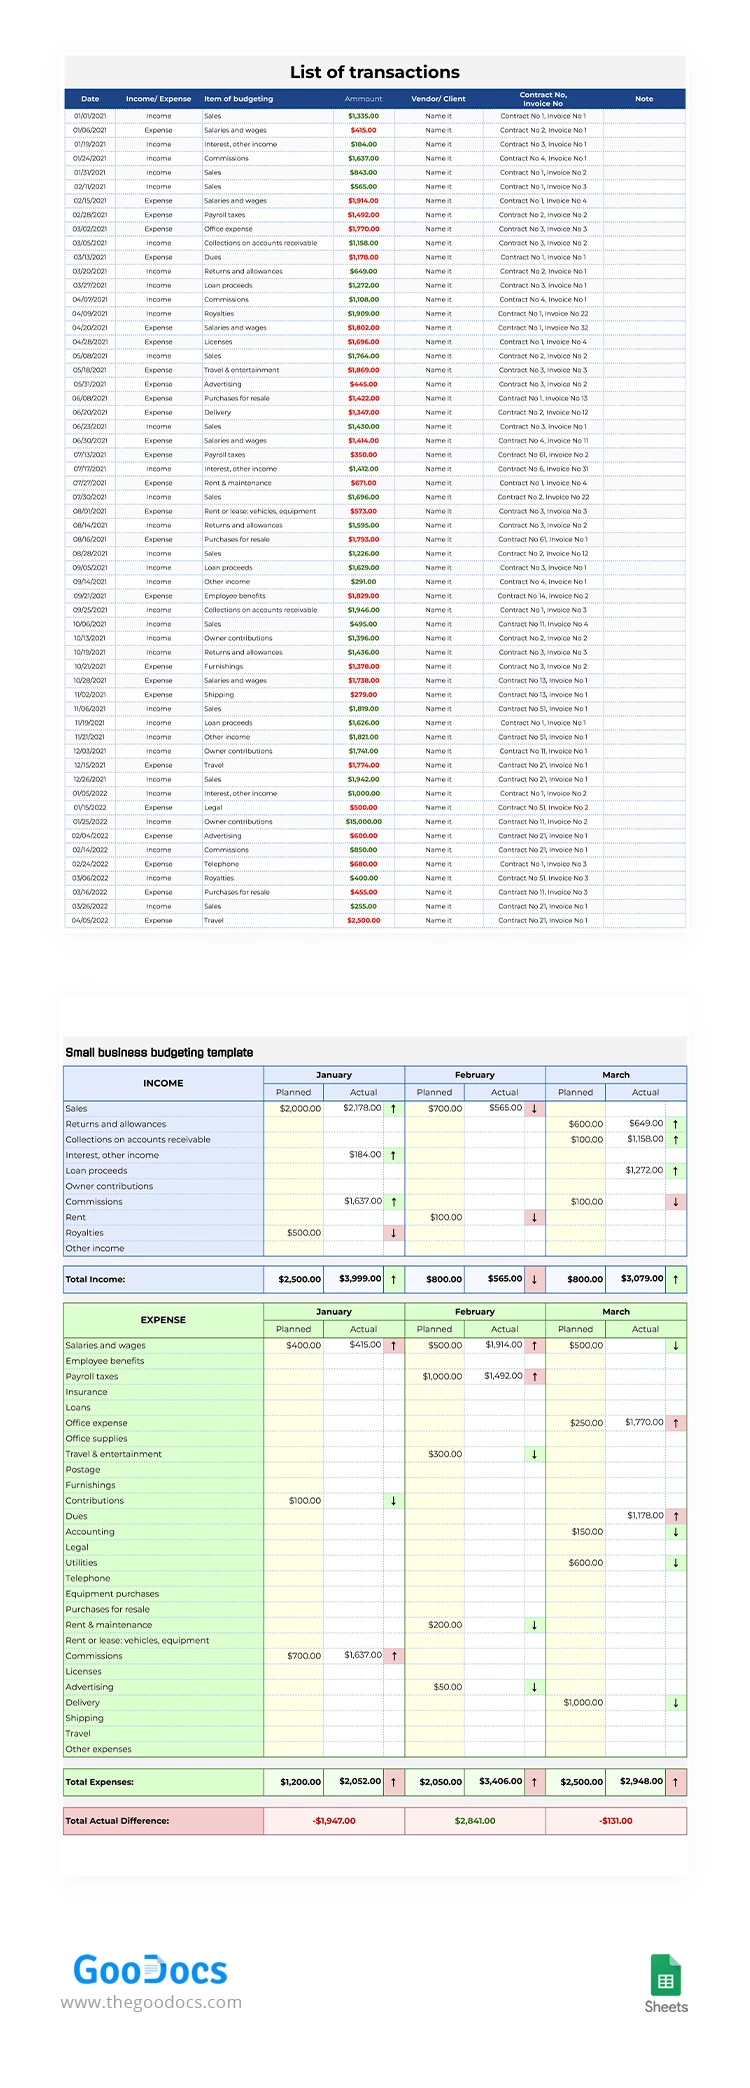 Small Business Budgeting - free Google Docs Template - 10063242